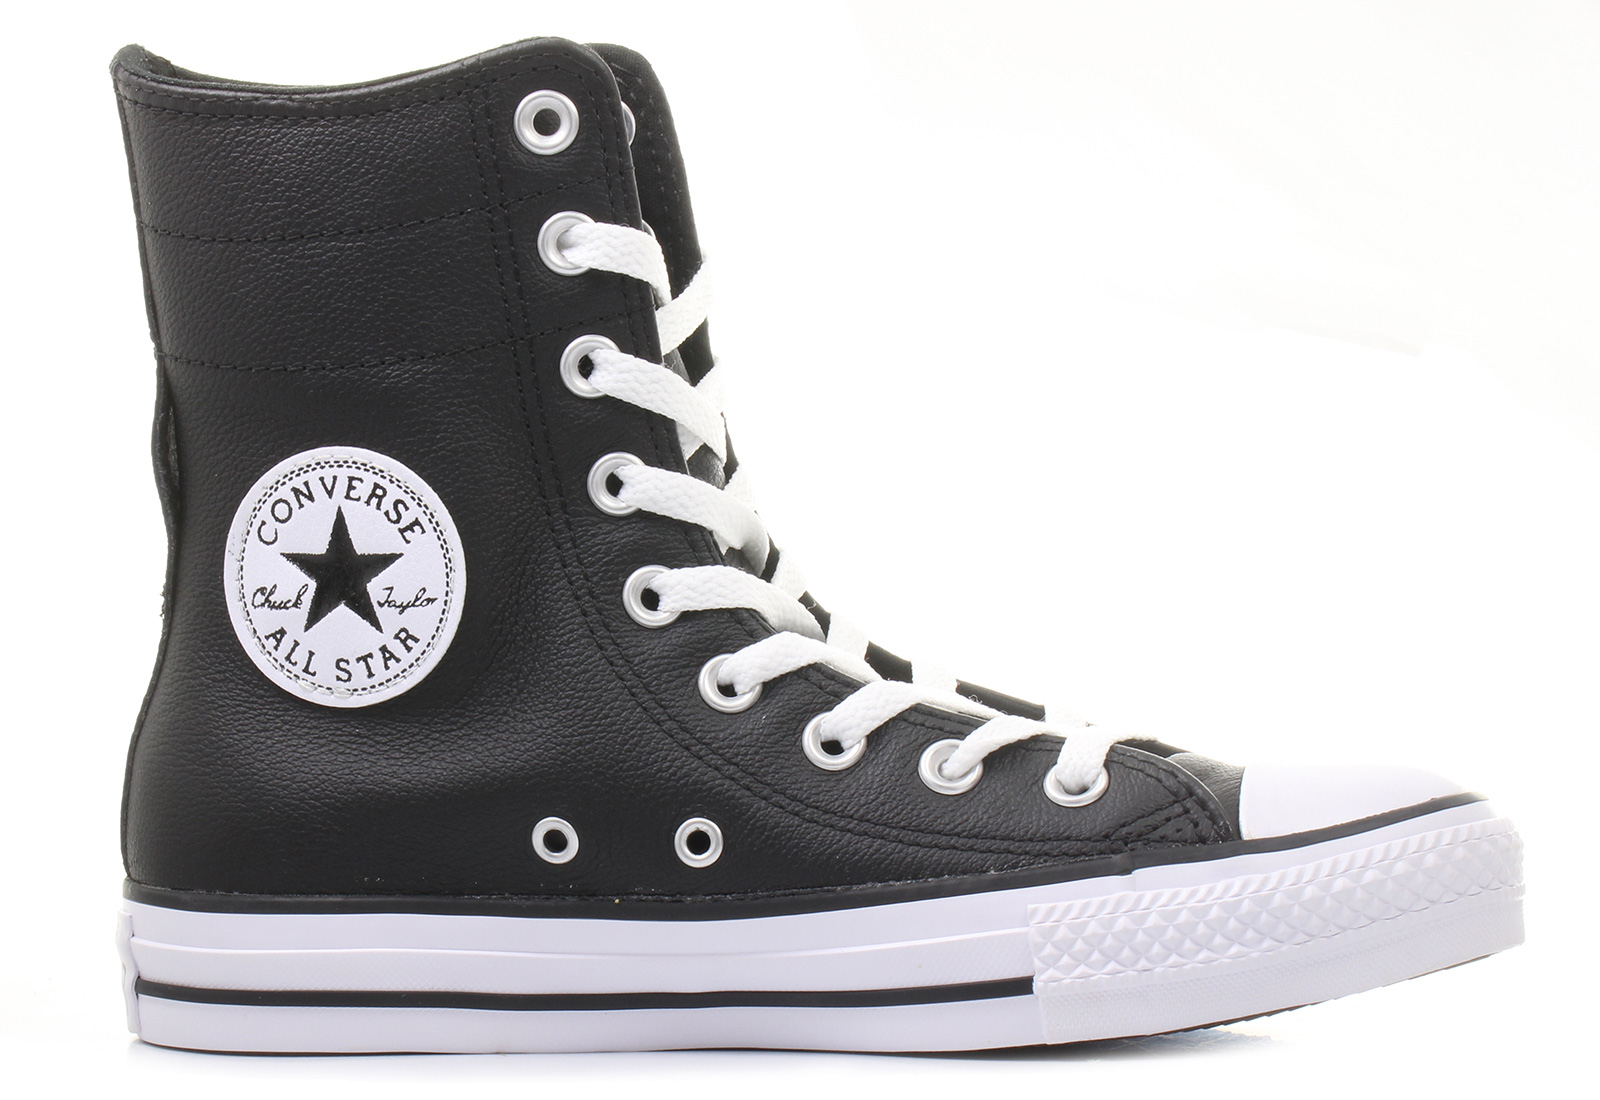 Converse Sneakers - Chuck Taylor All Star Hi-rise Leather Hi - 549704C ...